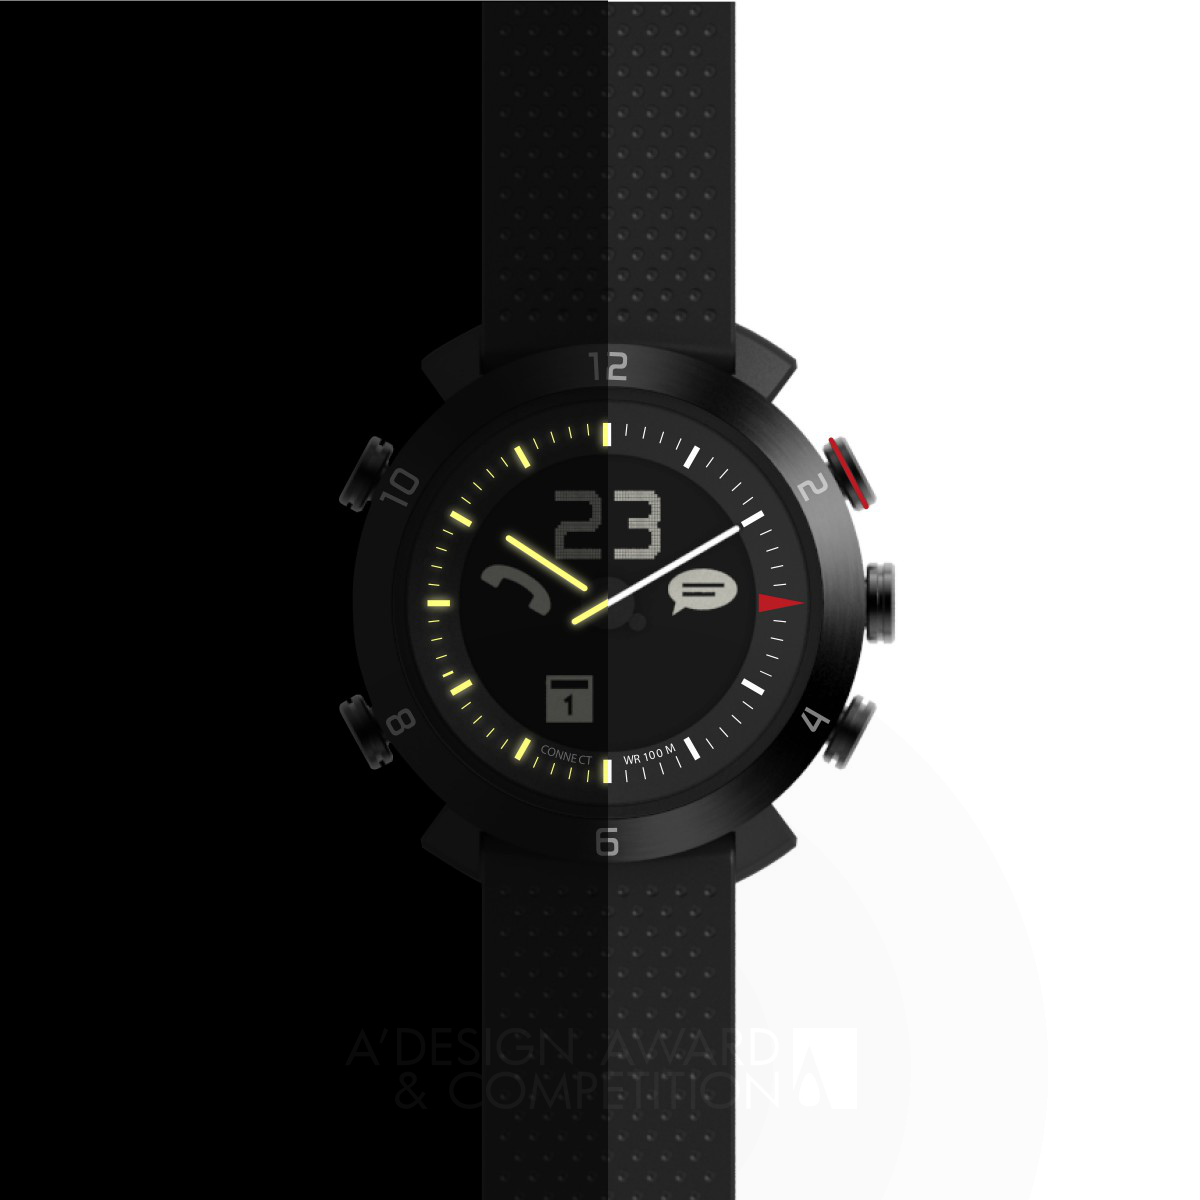 COGITO™ CLASSIC  Bluetooth Connected Watch by CONNECTEDEVICE Ltd